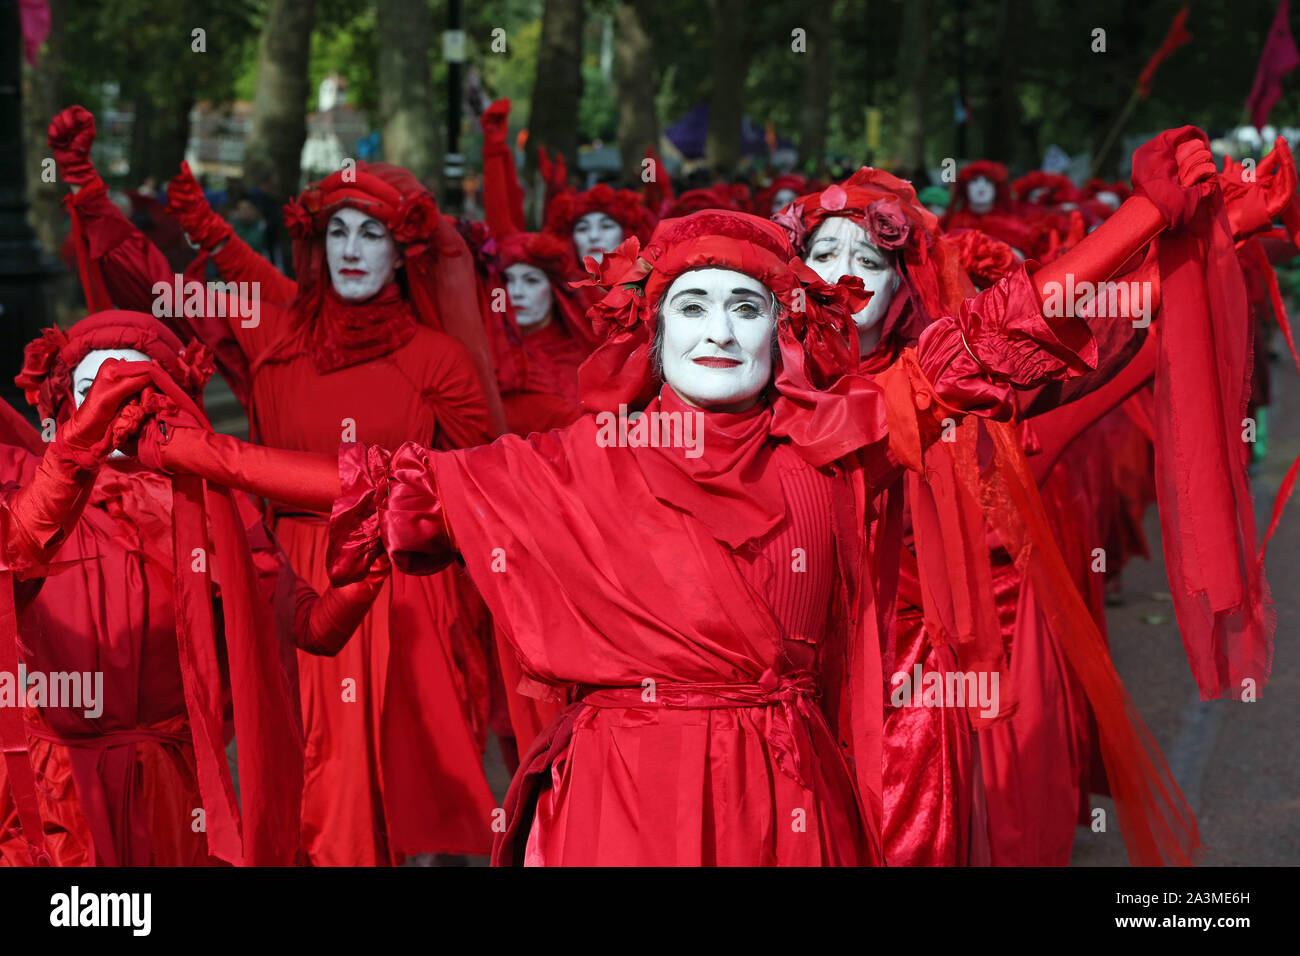 The group known as the Red Rebels in a procession leaving St James's Park, near Birdcage Walk, during the third day of an Extinction Rebellion (XR) protest in Westminster, London. Stock Photo